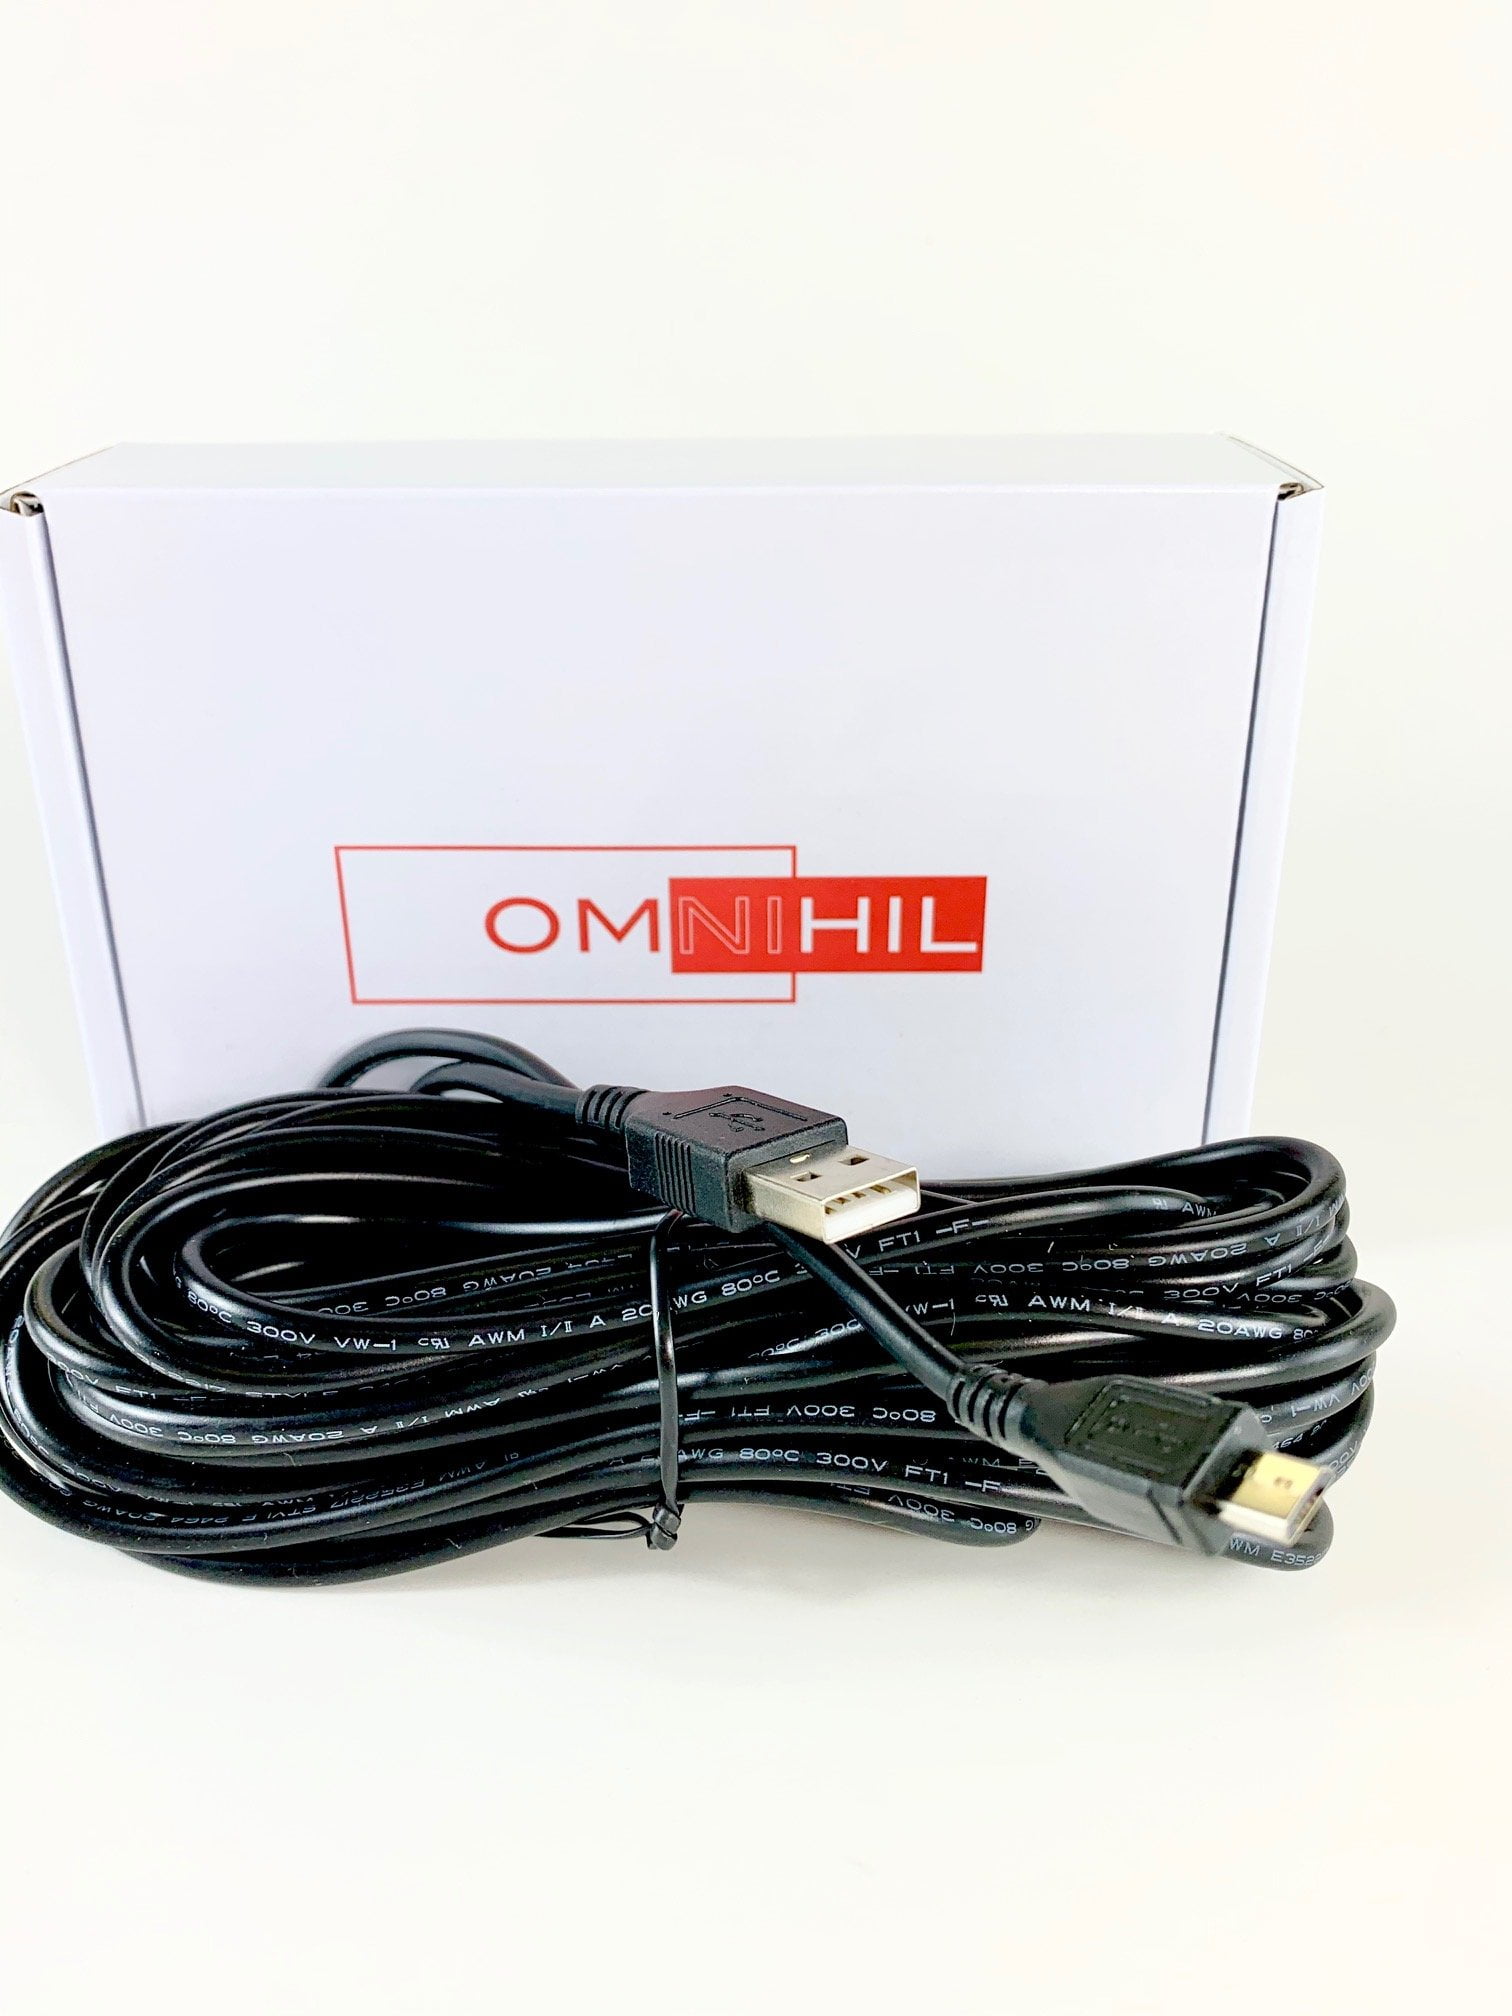 OMNIHIL 30 Feet Long High Speed USB 2.0 Cable Compatible with Donner DED-200 Electric Kit with Mesh Head 8 Piece 